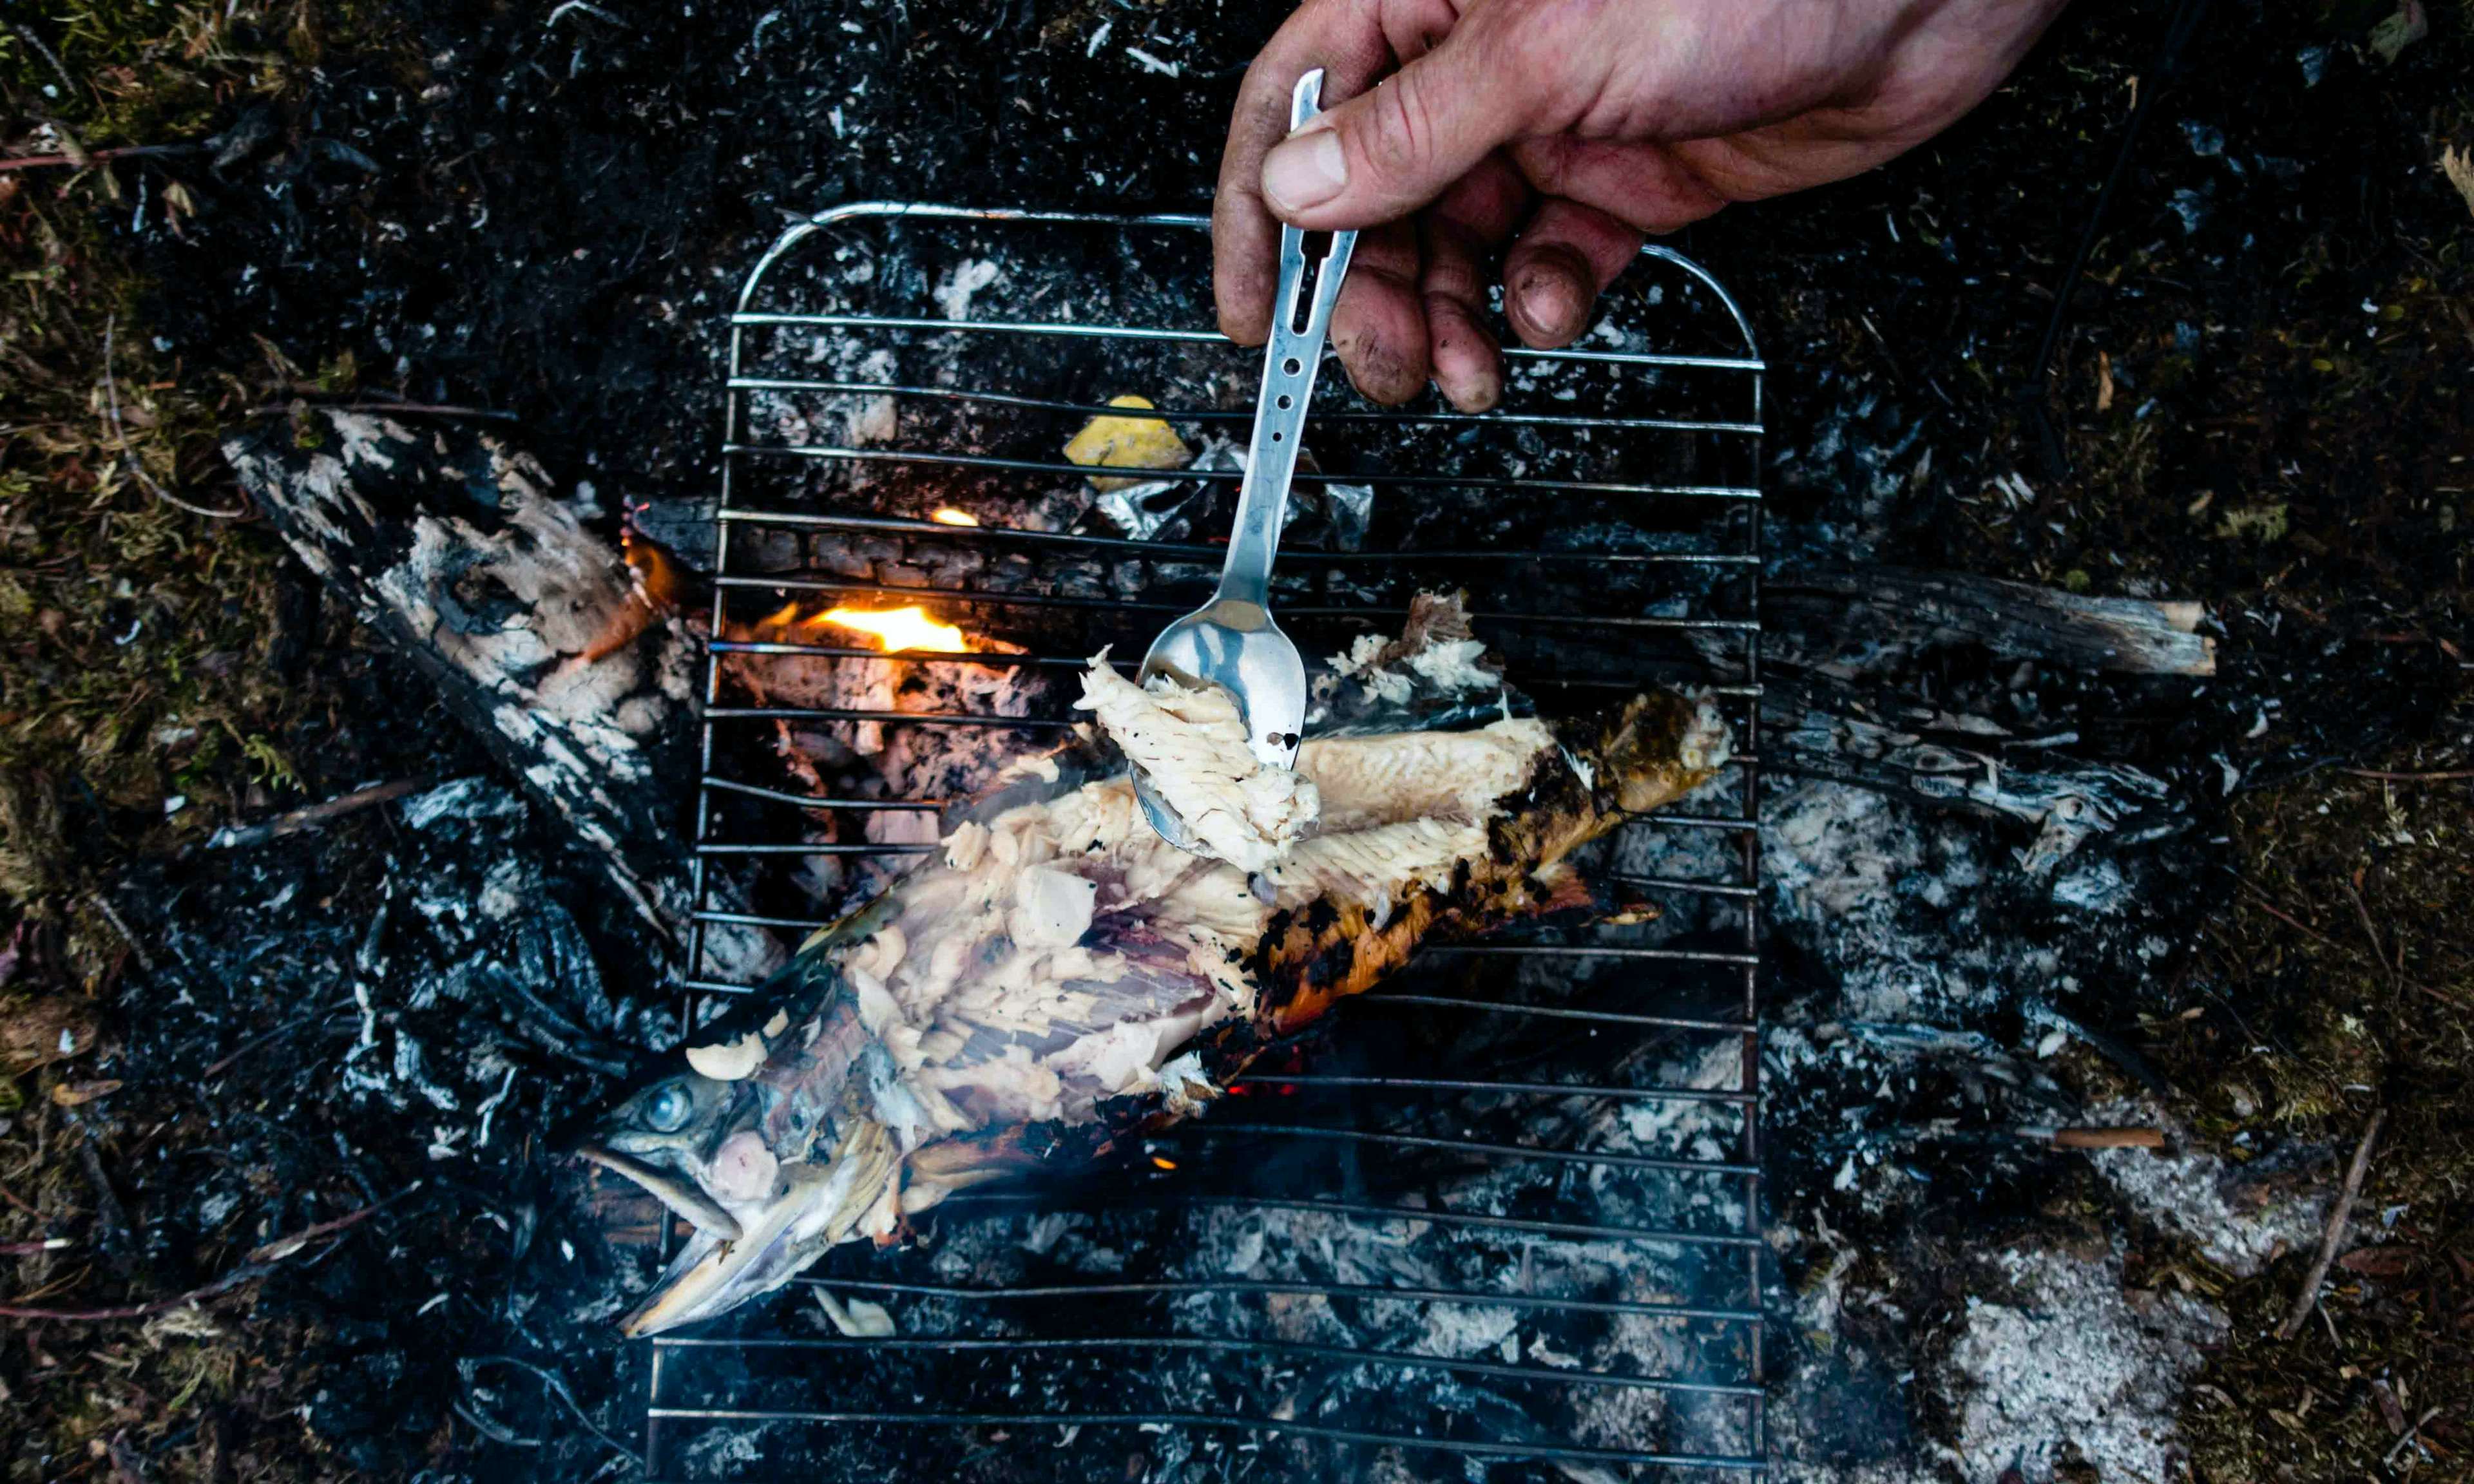 A hand holding a spoon pokes at a fish grilling over an open fire.